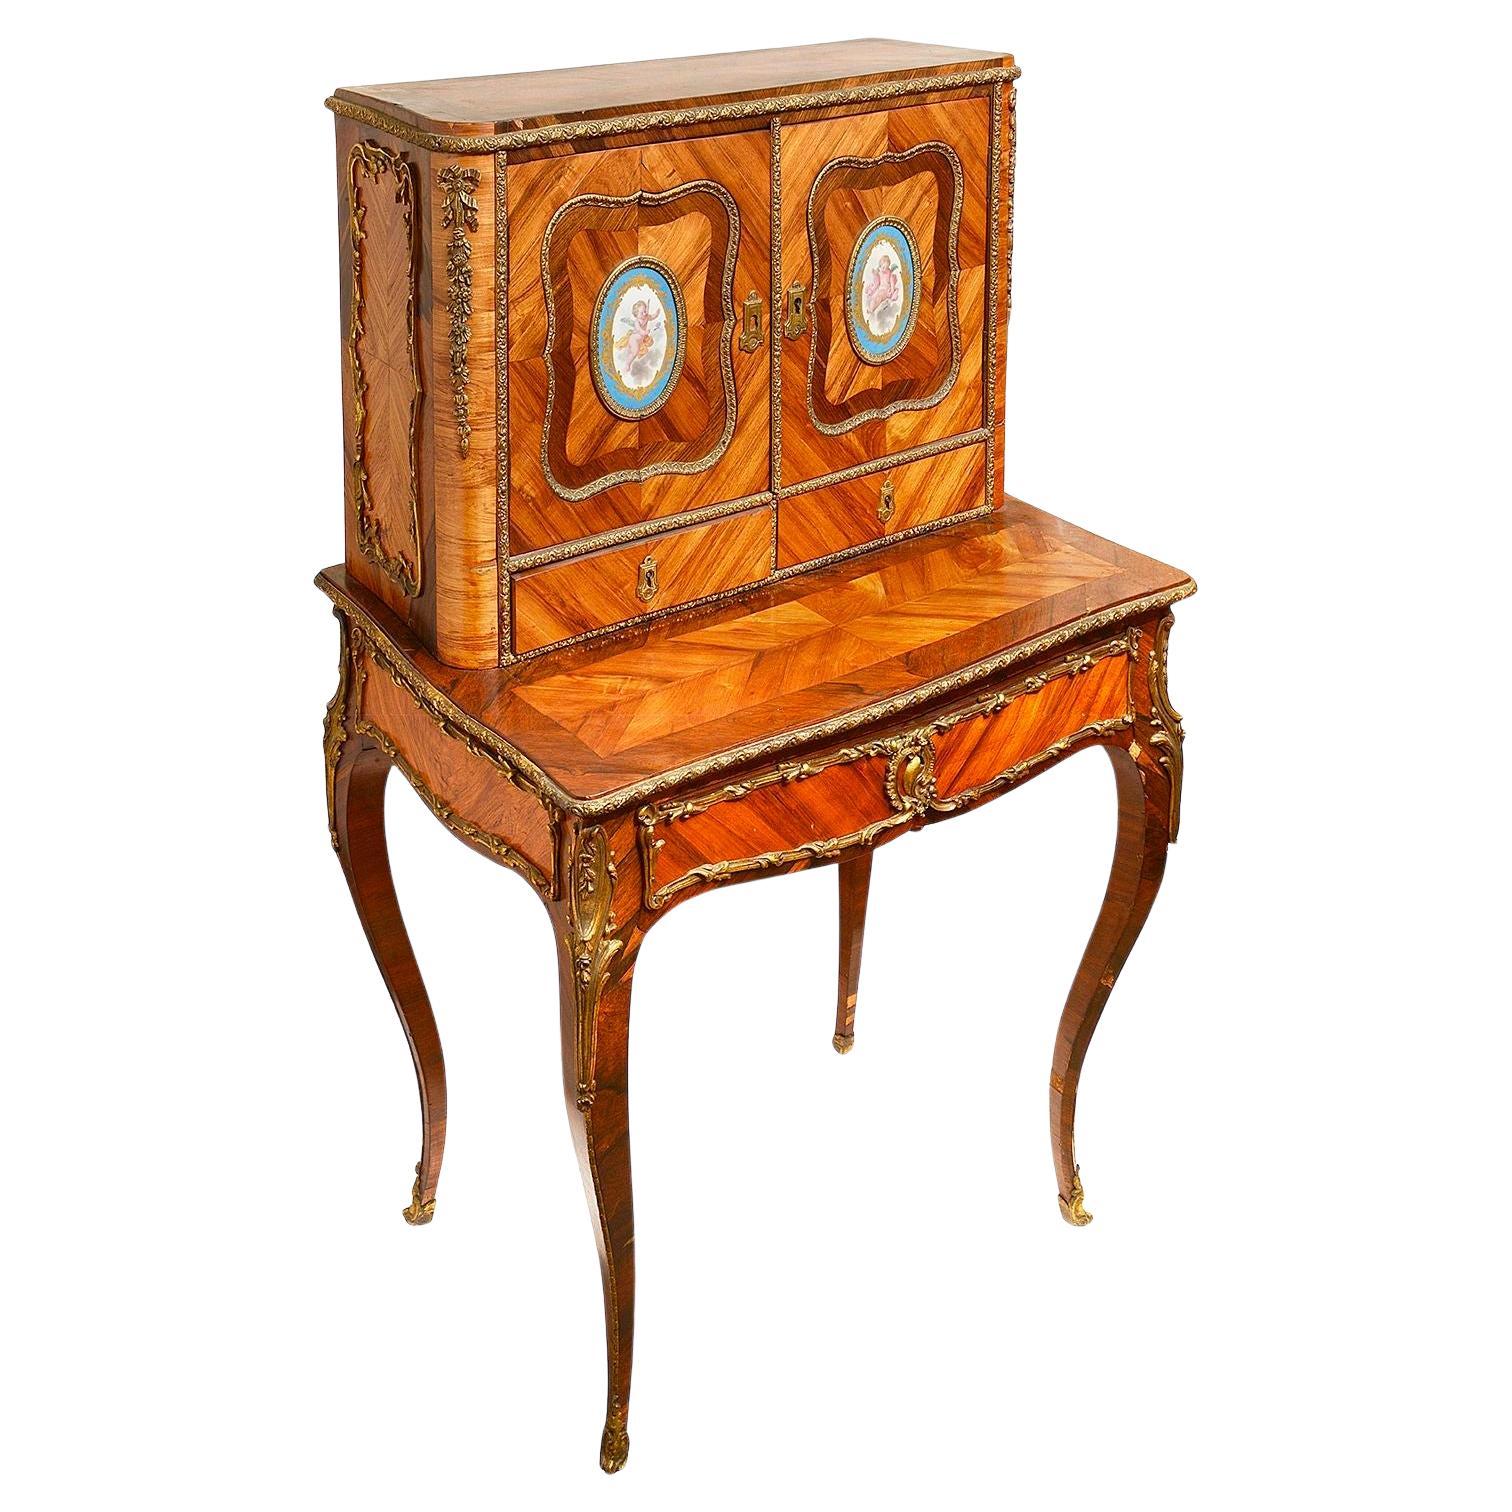 French Kingwood and Ormolu-Mounted Bonheur Du Jour, 19th Century For Sale